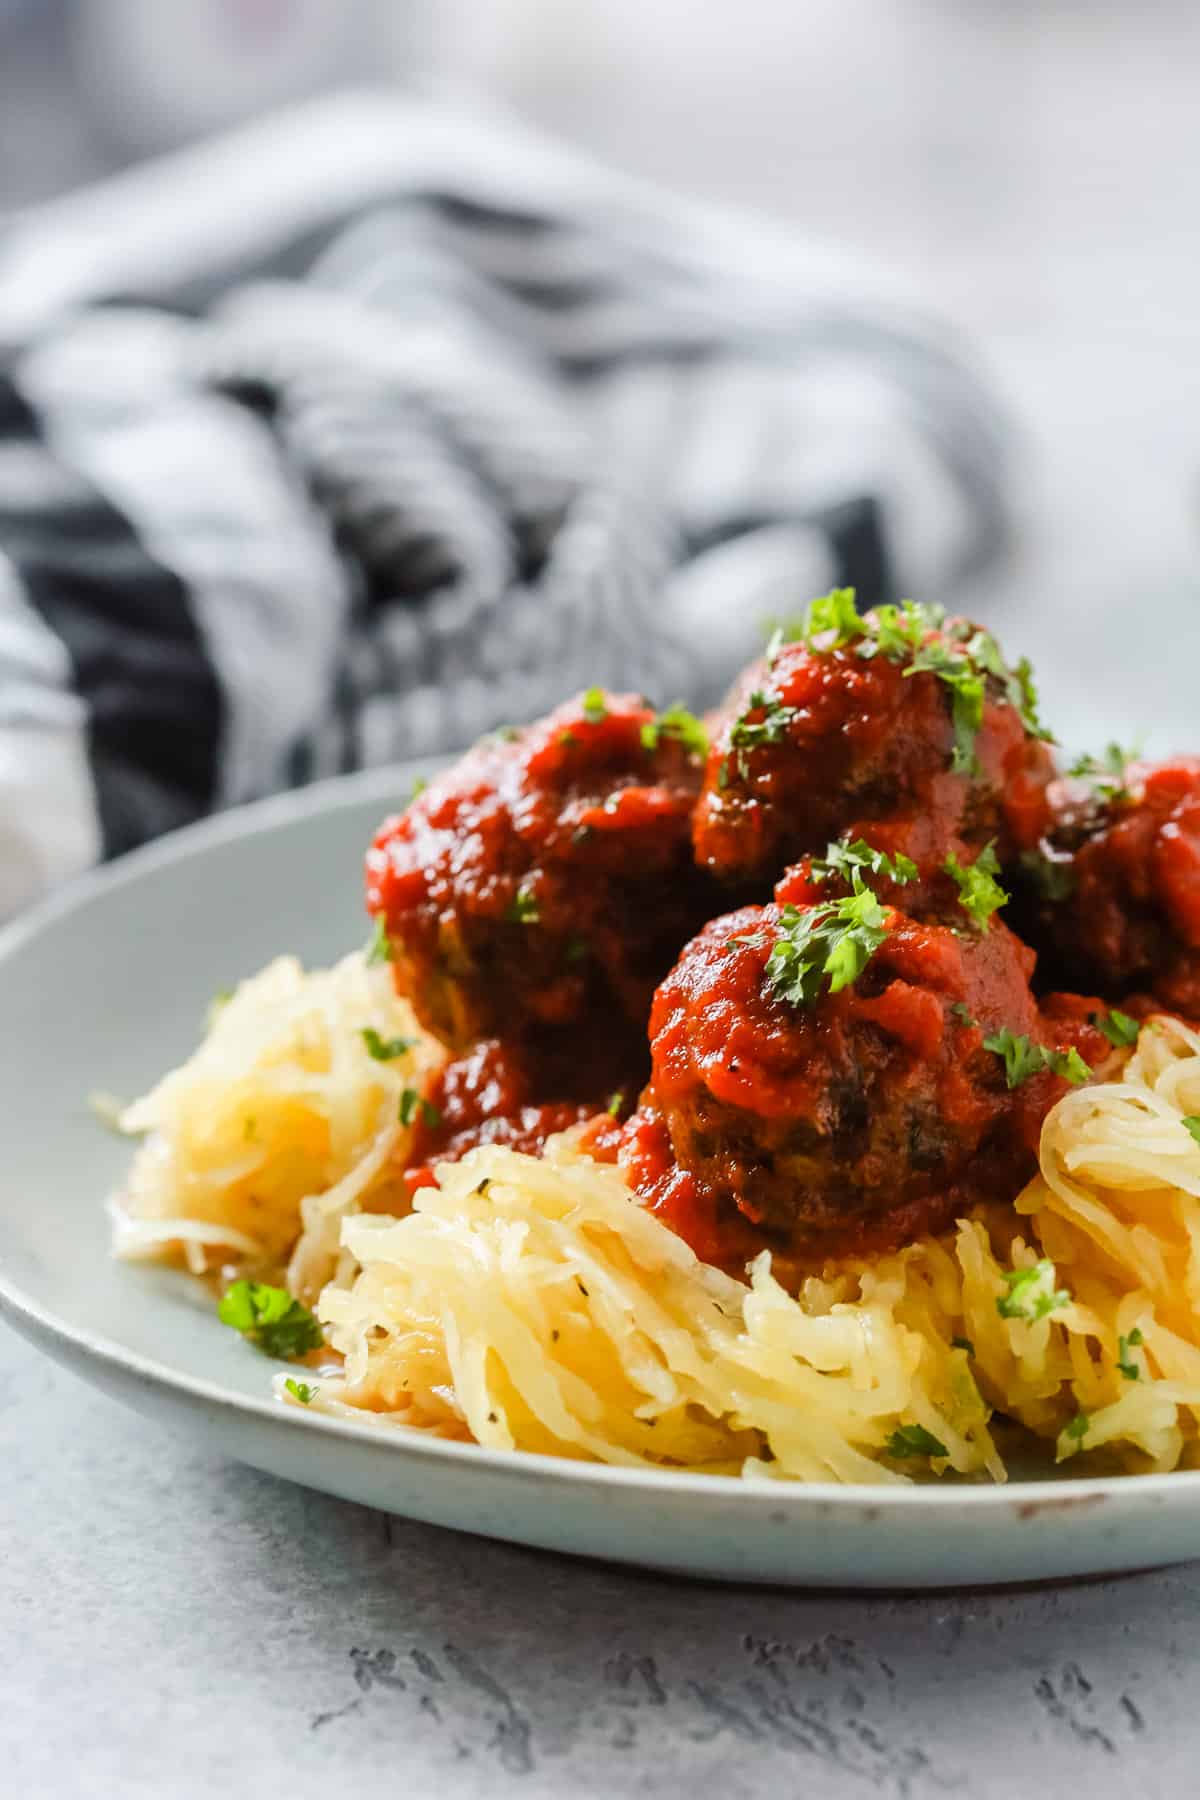 A close up of a plate containing Spaghetti Squash and Meatballs